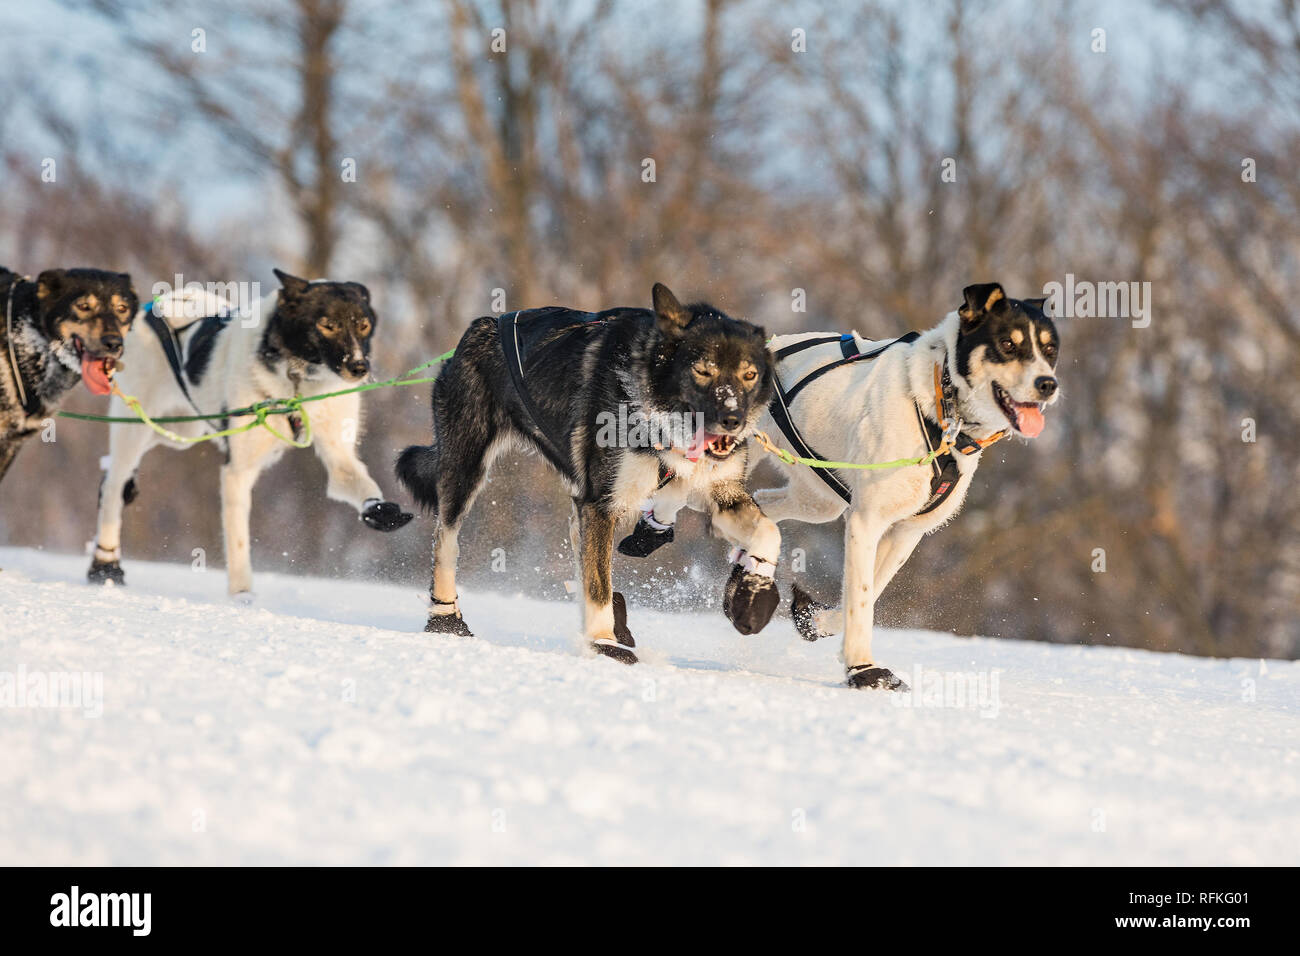 Husky dogs in a team in winter landscape. Husky sled dogs running on a snowy wilderness road. Sledding with husky dogs in winter czech countryside. Stock Photo